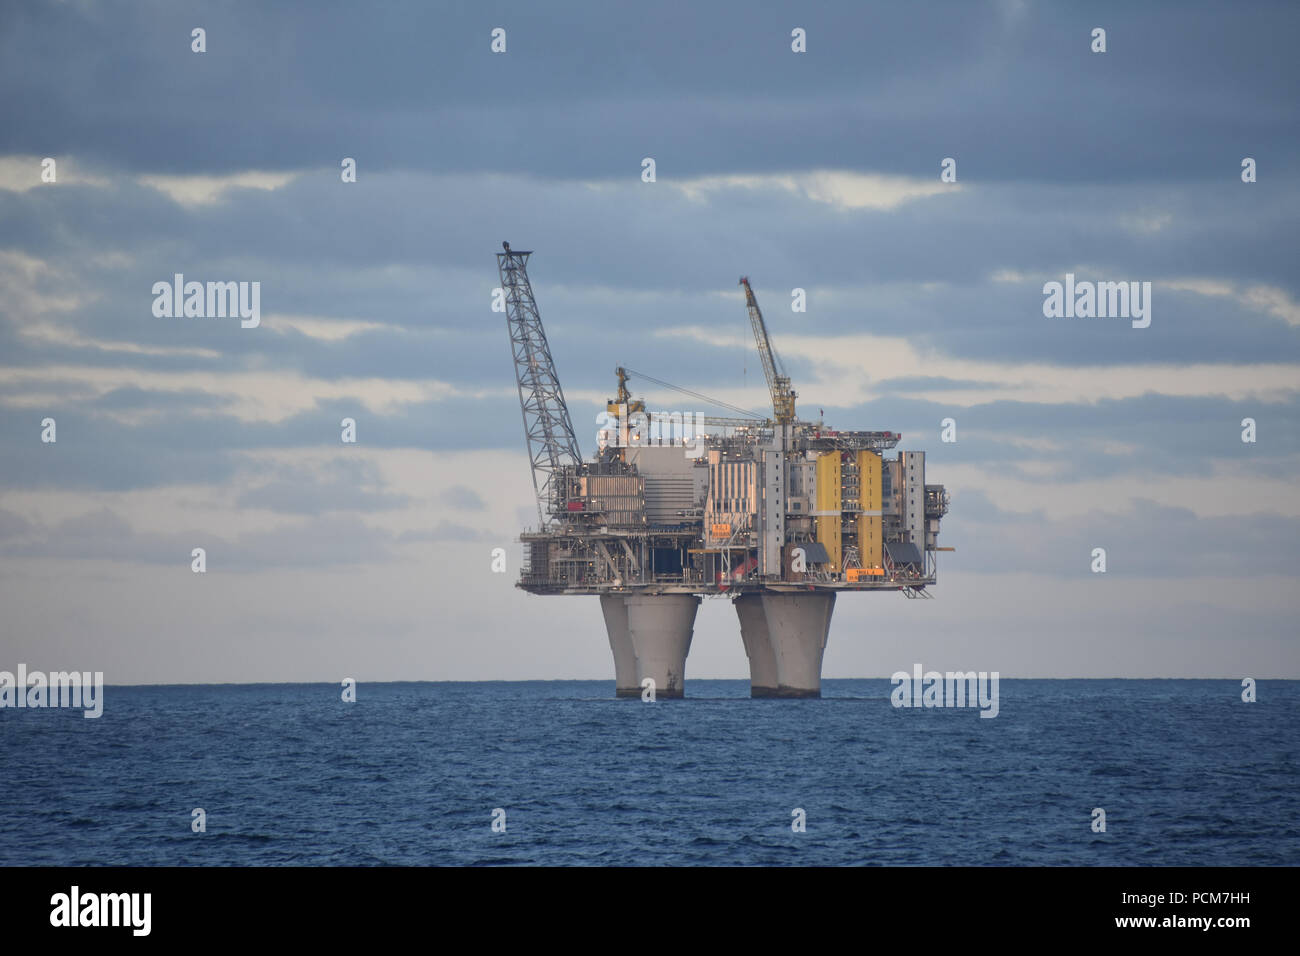 Deep sea oil rig in the North Sea between Norway and Scotland. July, 2018 Stock Photo